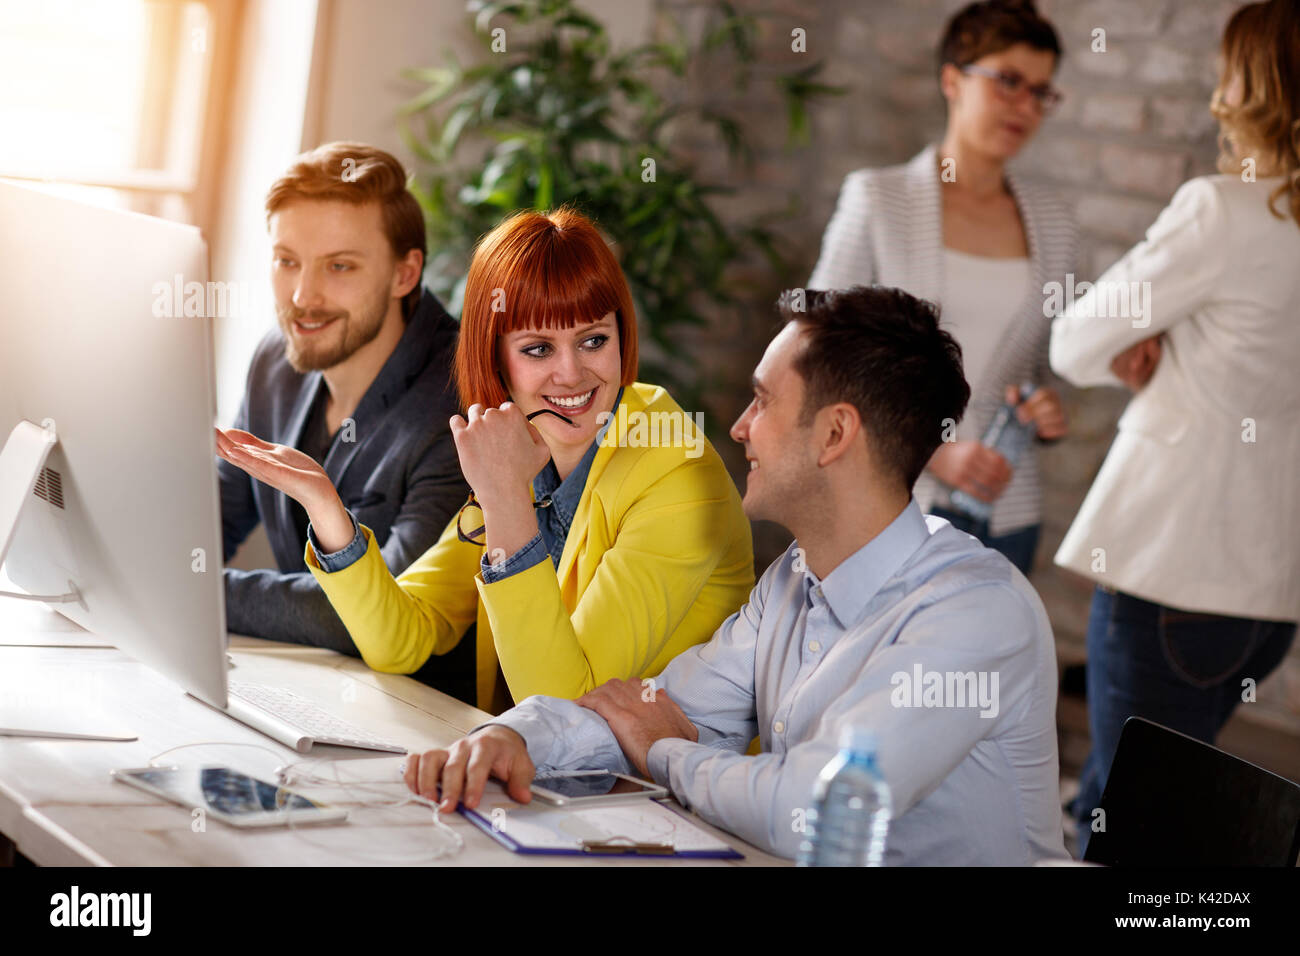 Group of young people working together on computer in office Stock Photo